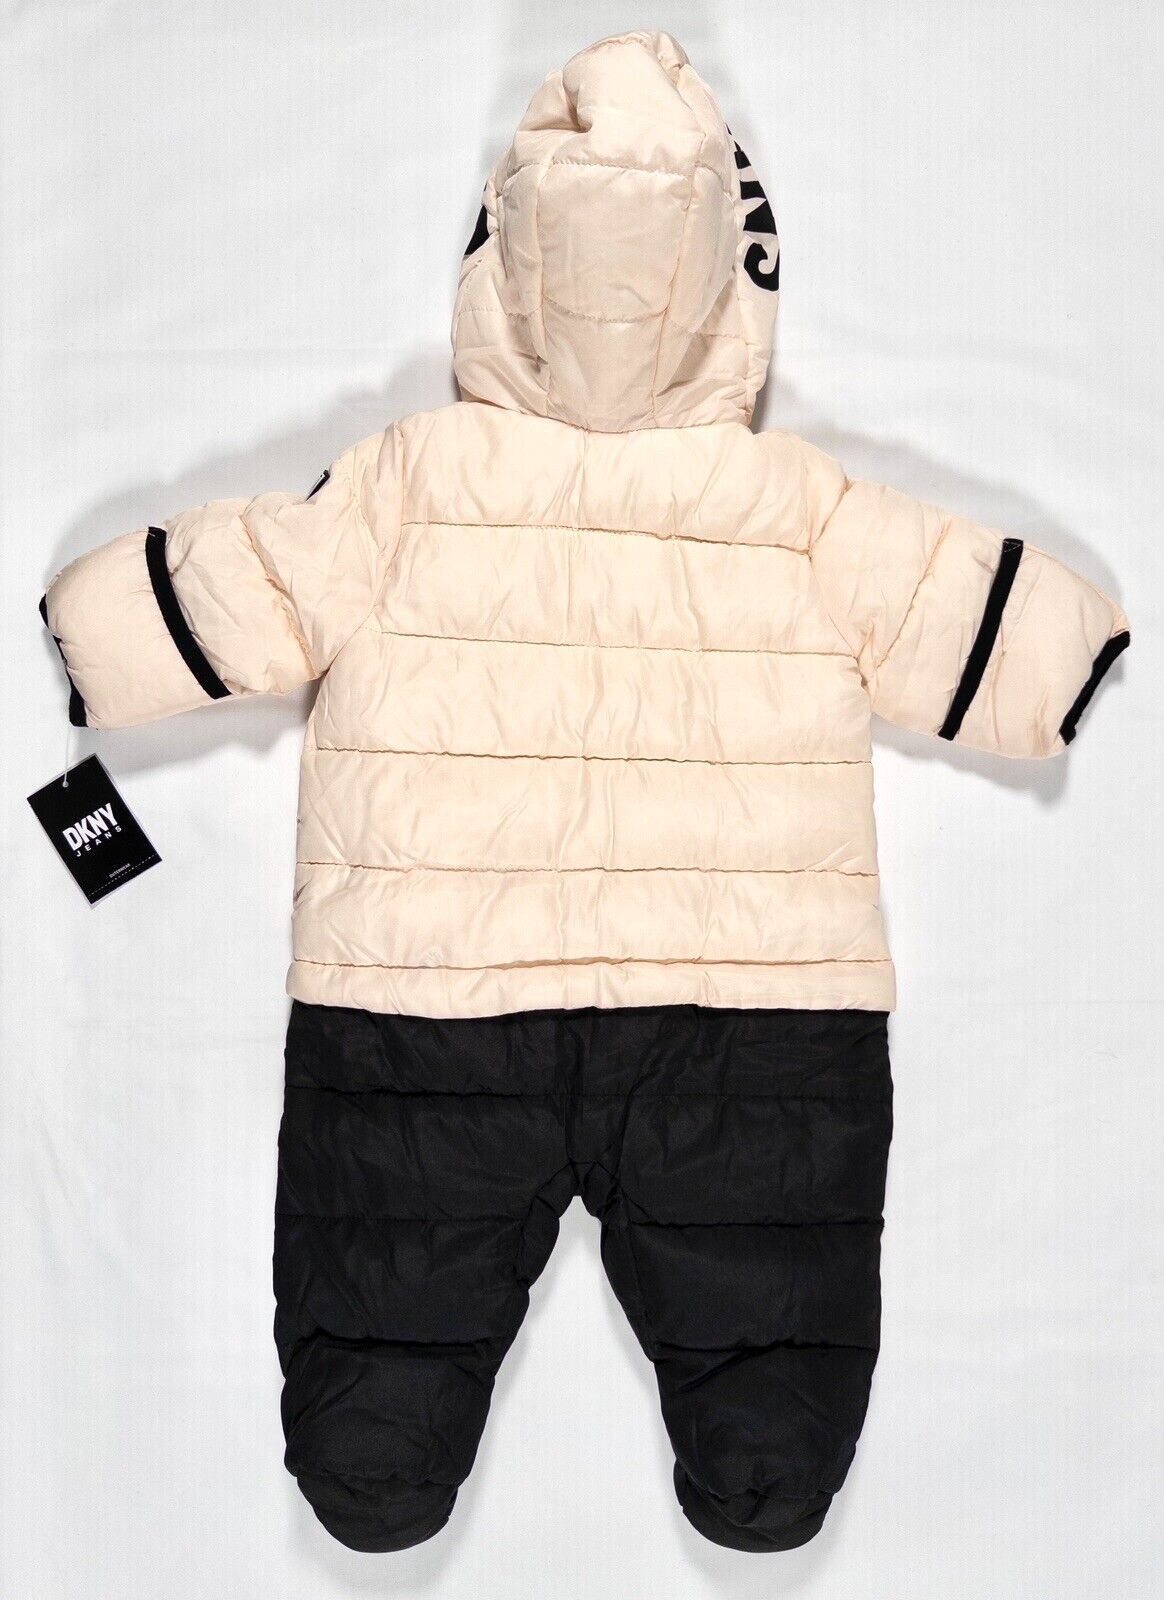 DKNY JEANS Baby Girls All in one Snowsuit Pink Black Size UK 6-9 Months